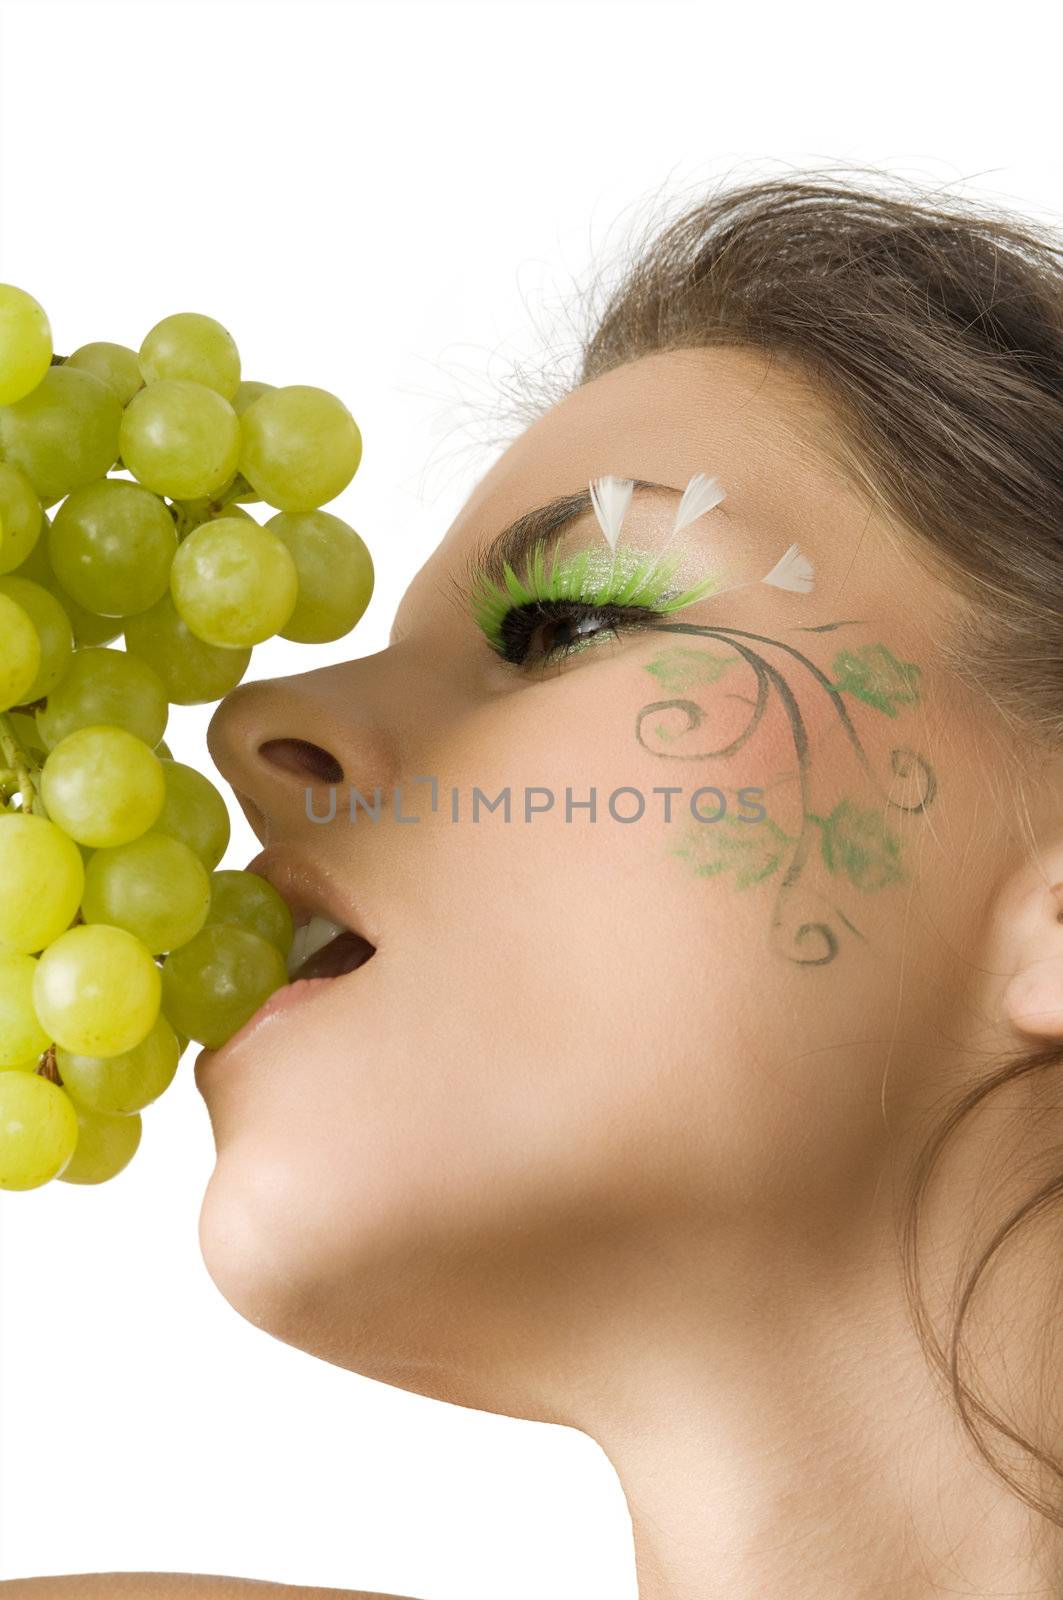 nice and sexy girl with a nice paint on her face in act to eat some green grape